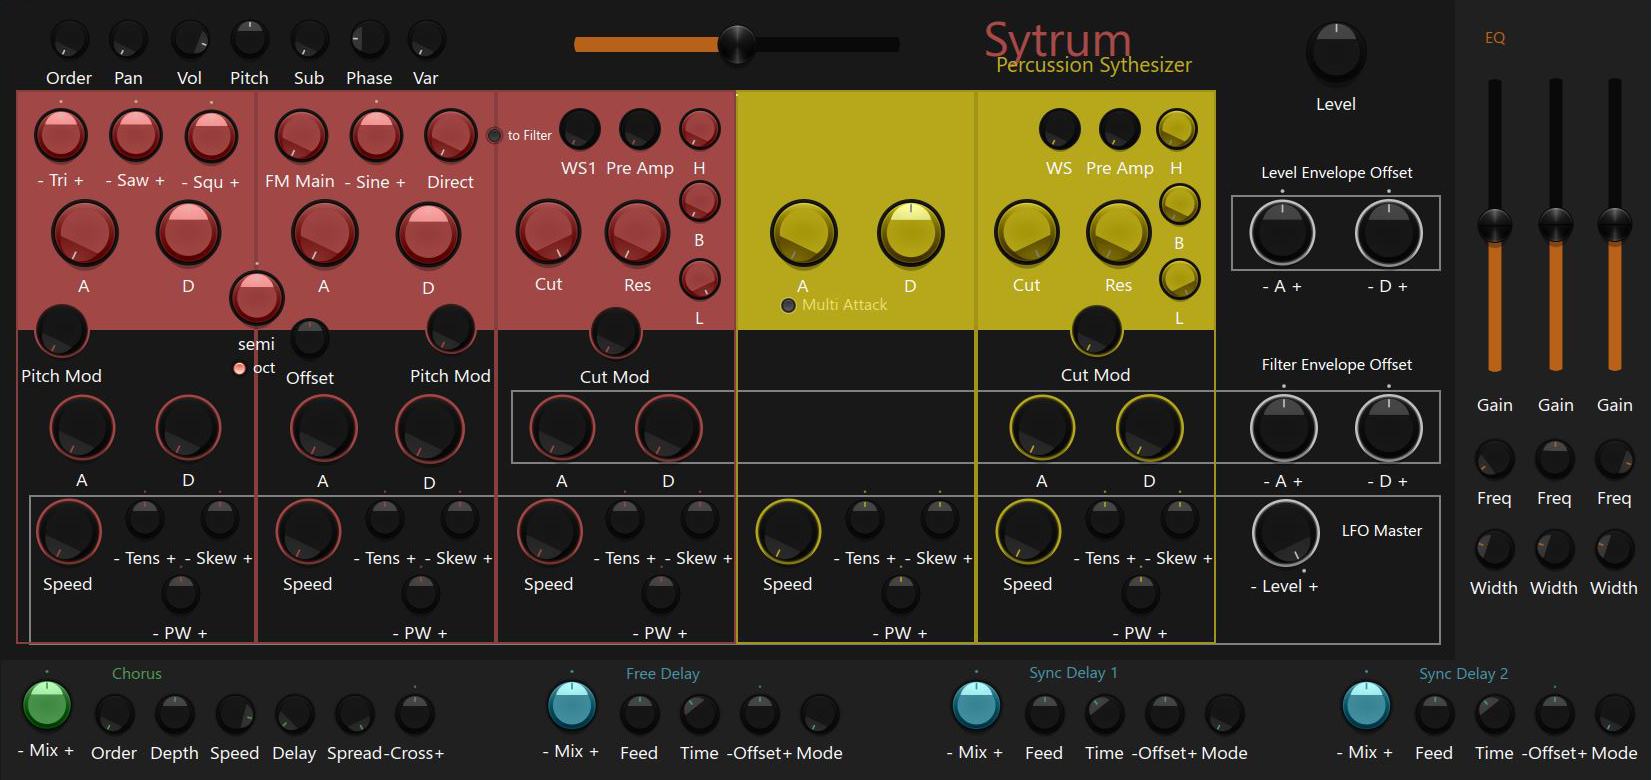 Sytrum Percussion Synth.JPG